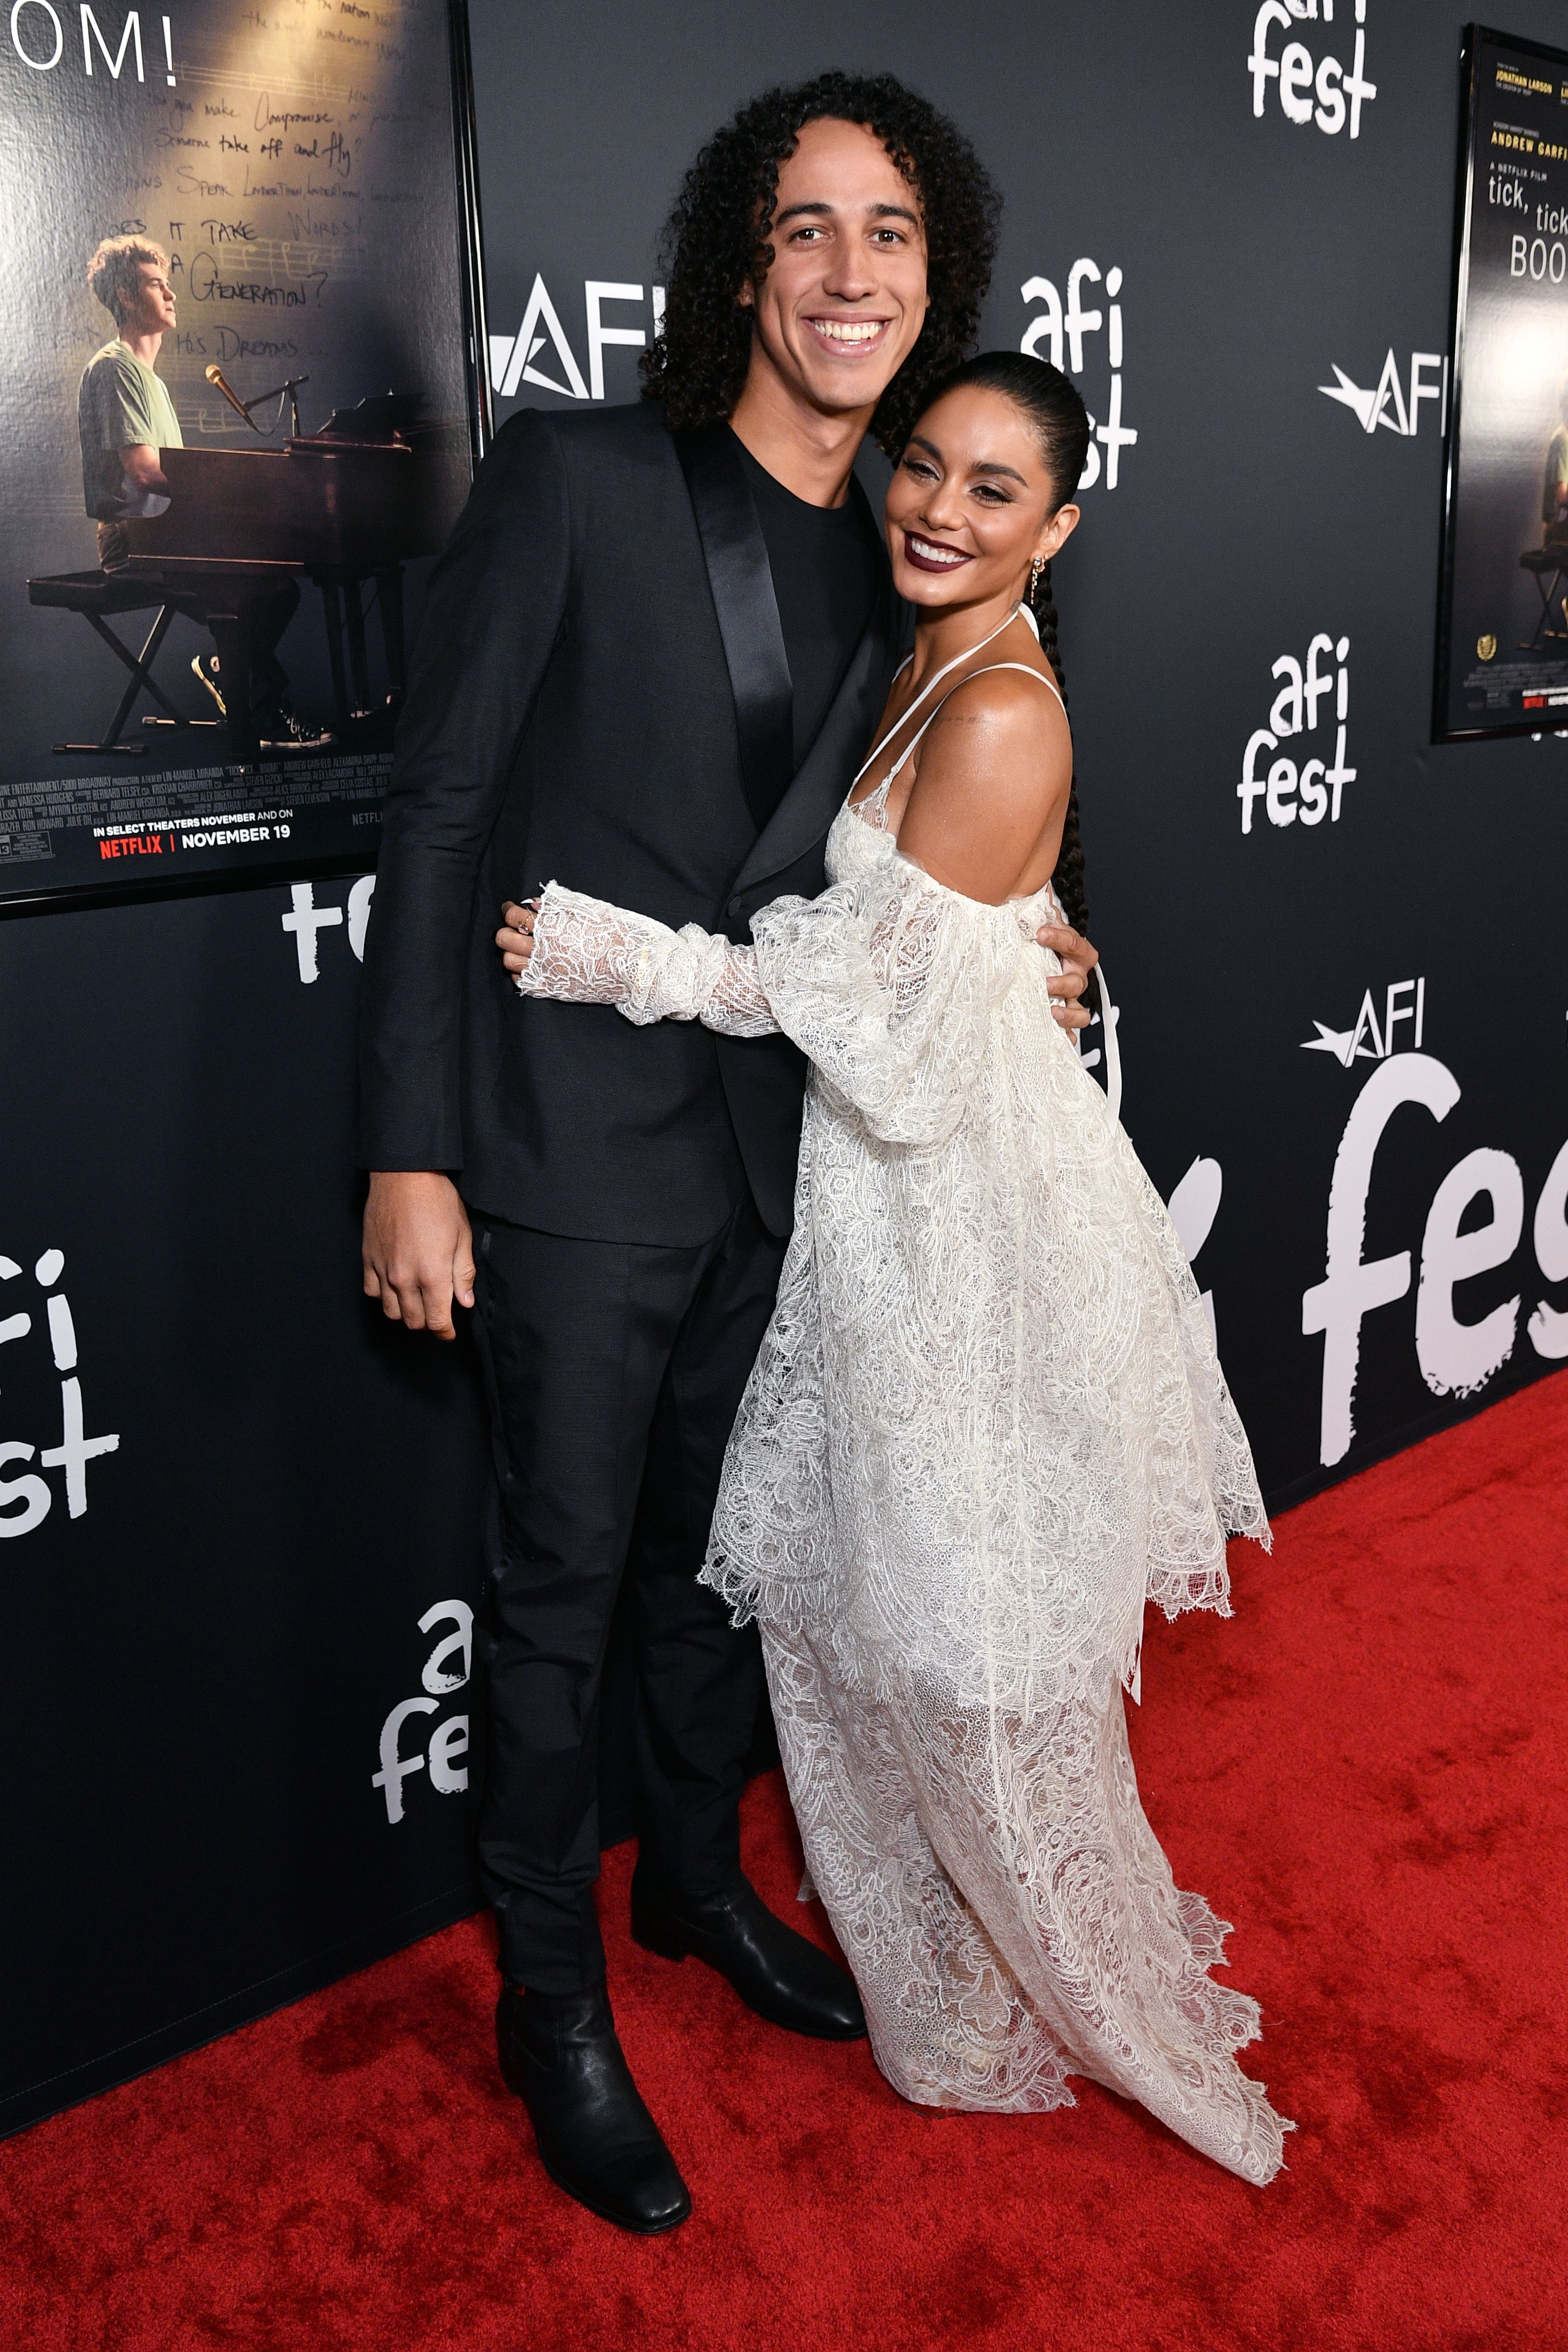 Vanessa Hudgens is engaged: This is how she met her fiancé Cole Tucker